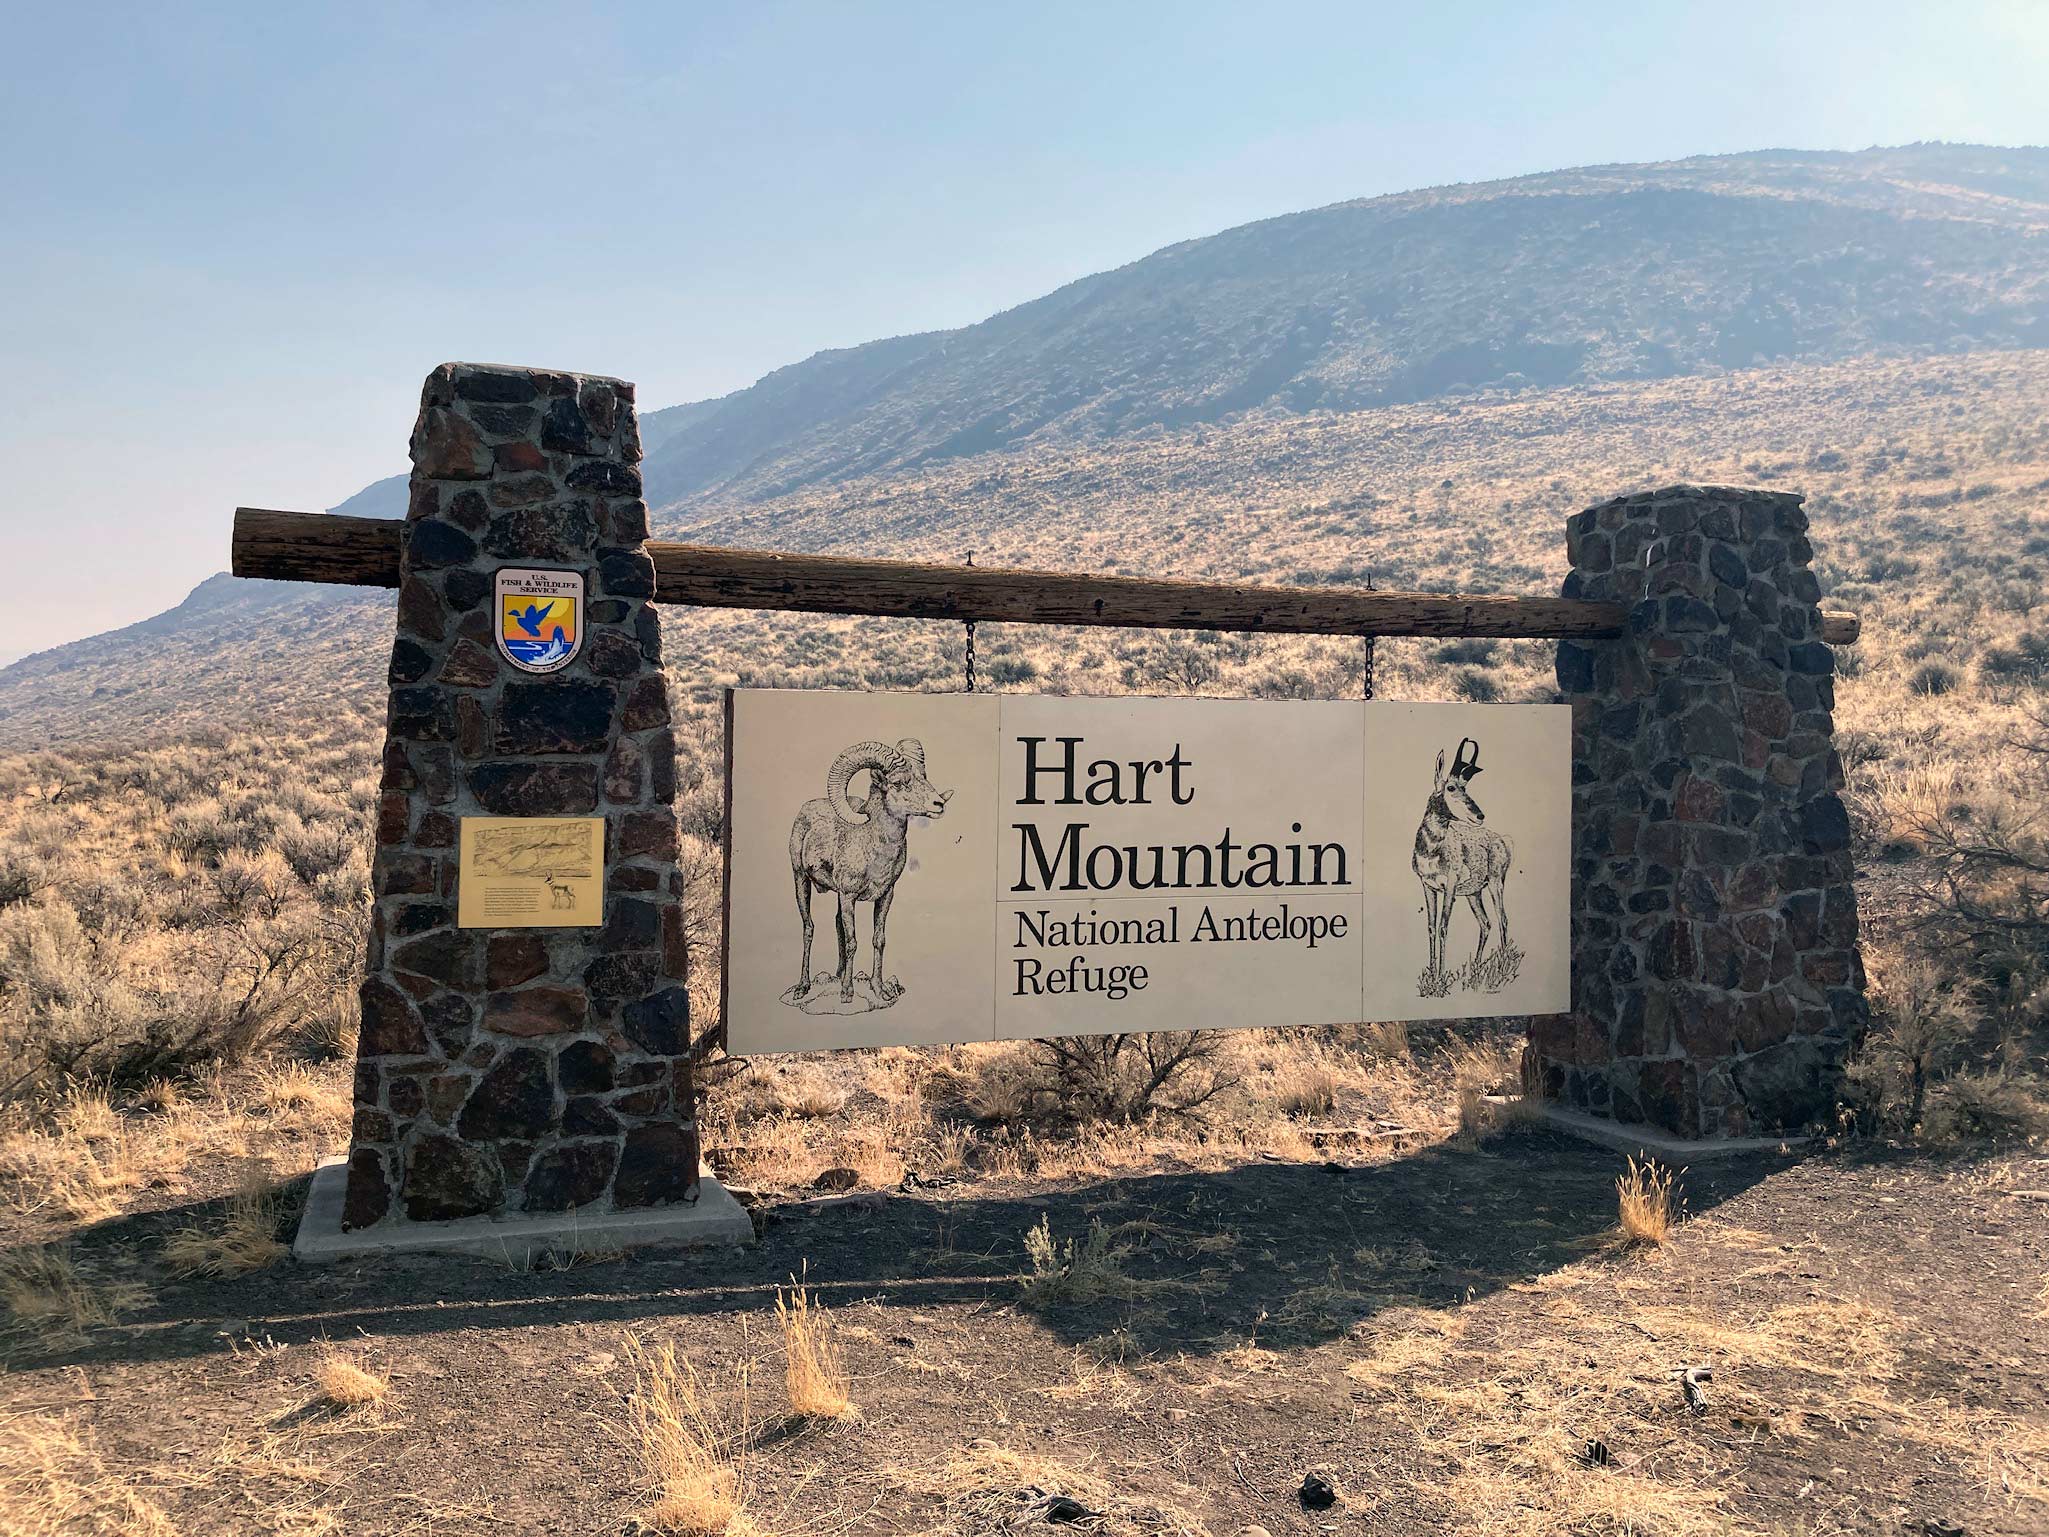 Stone pillars hold a large sign that reads Hart Mountain National Antelope Refuge with a mountain rising in the background